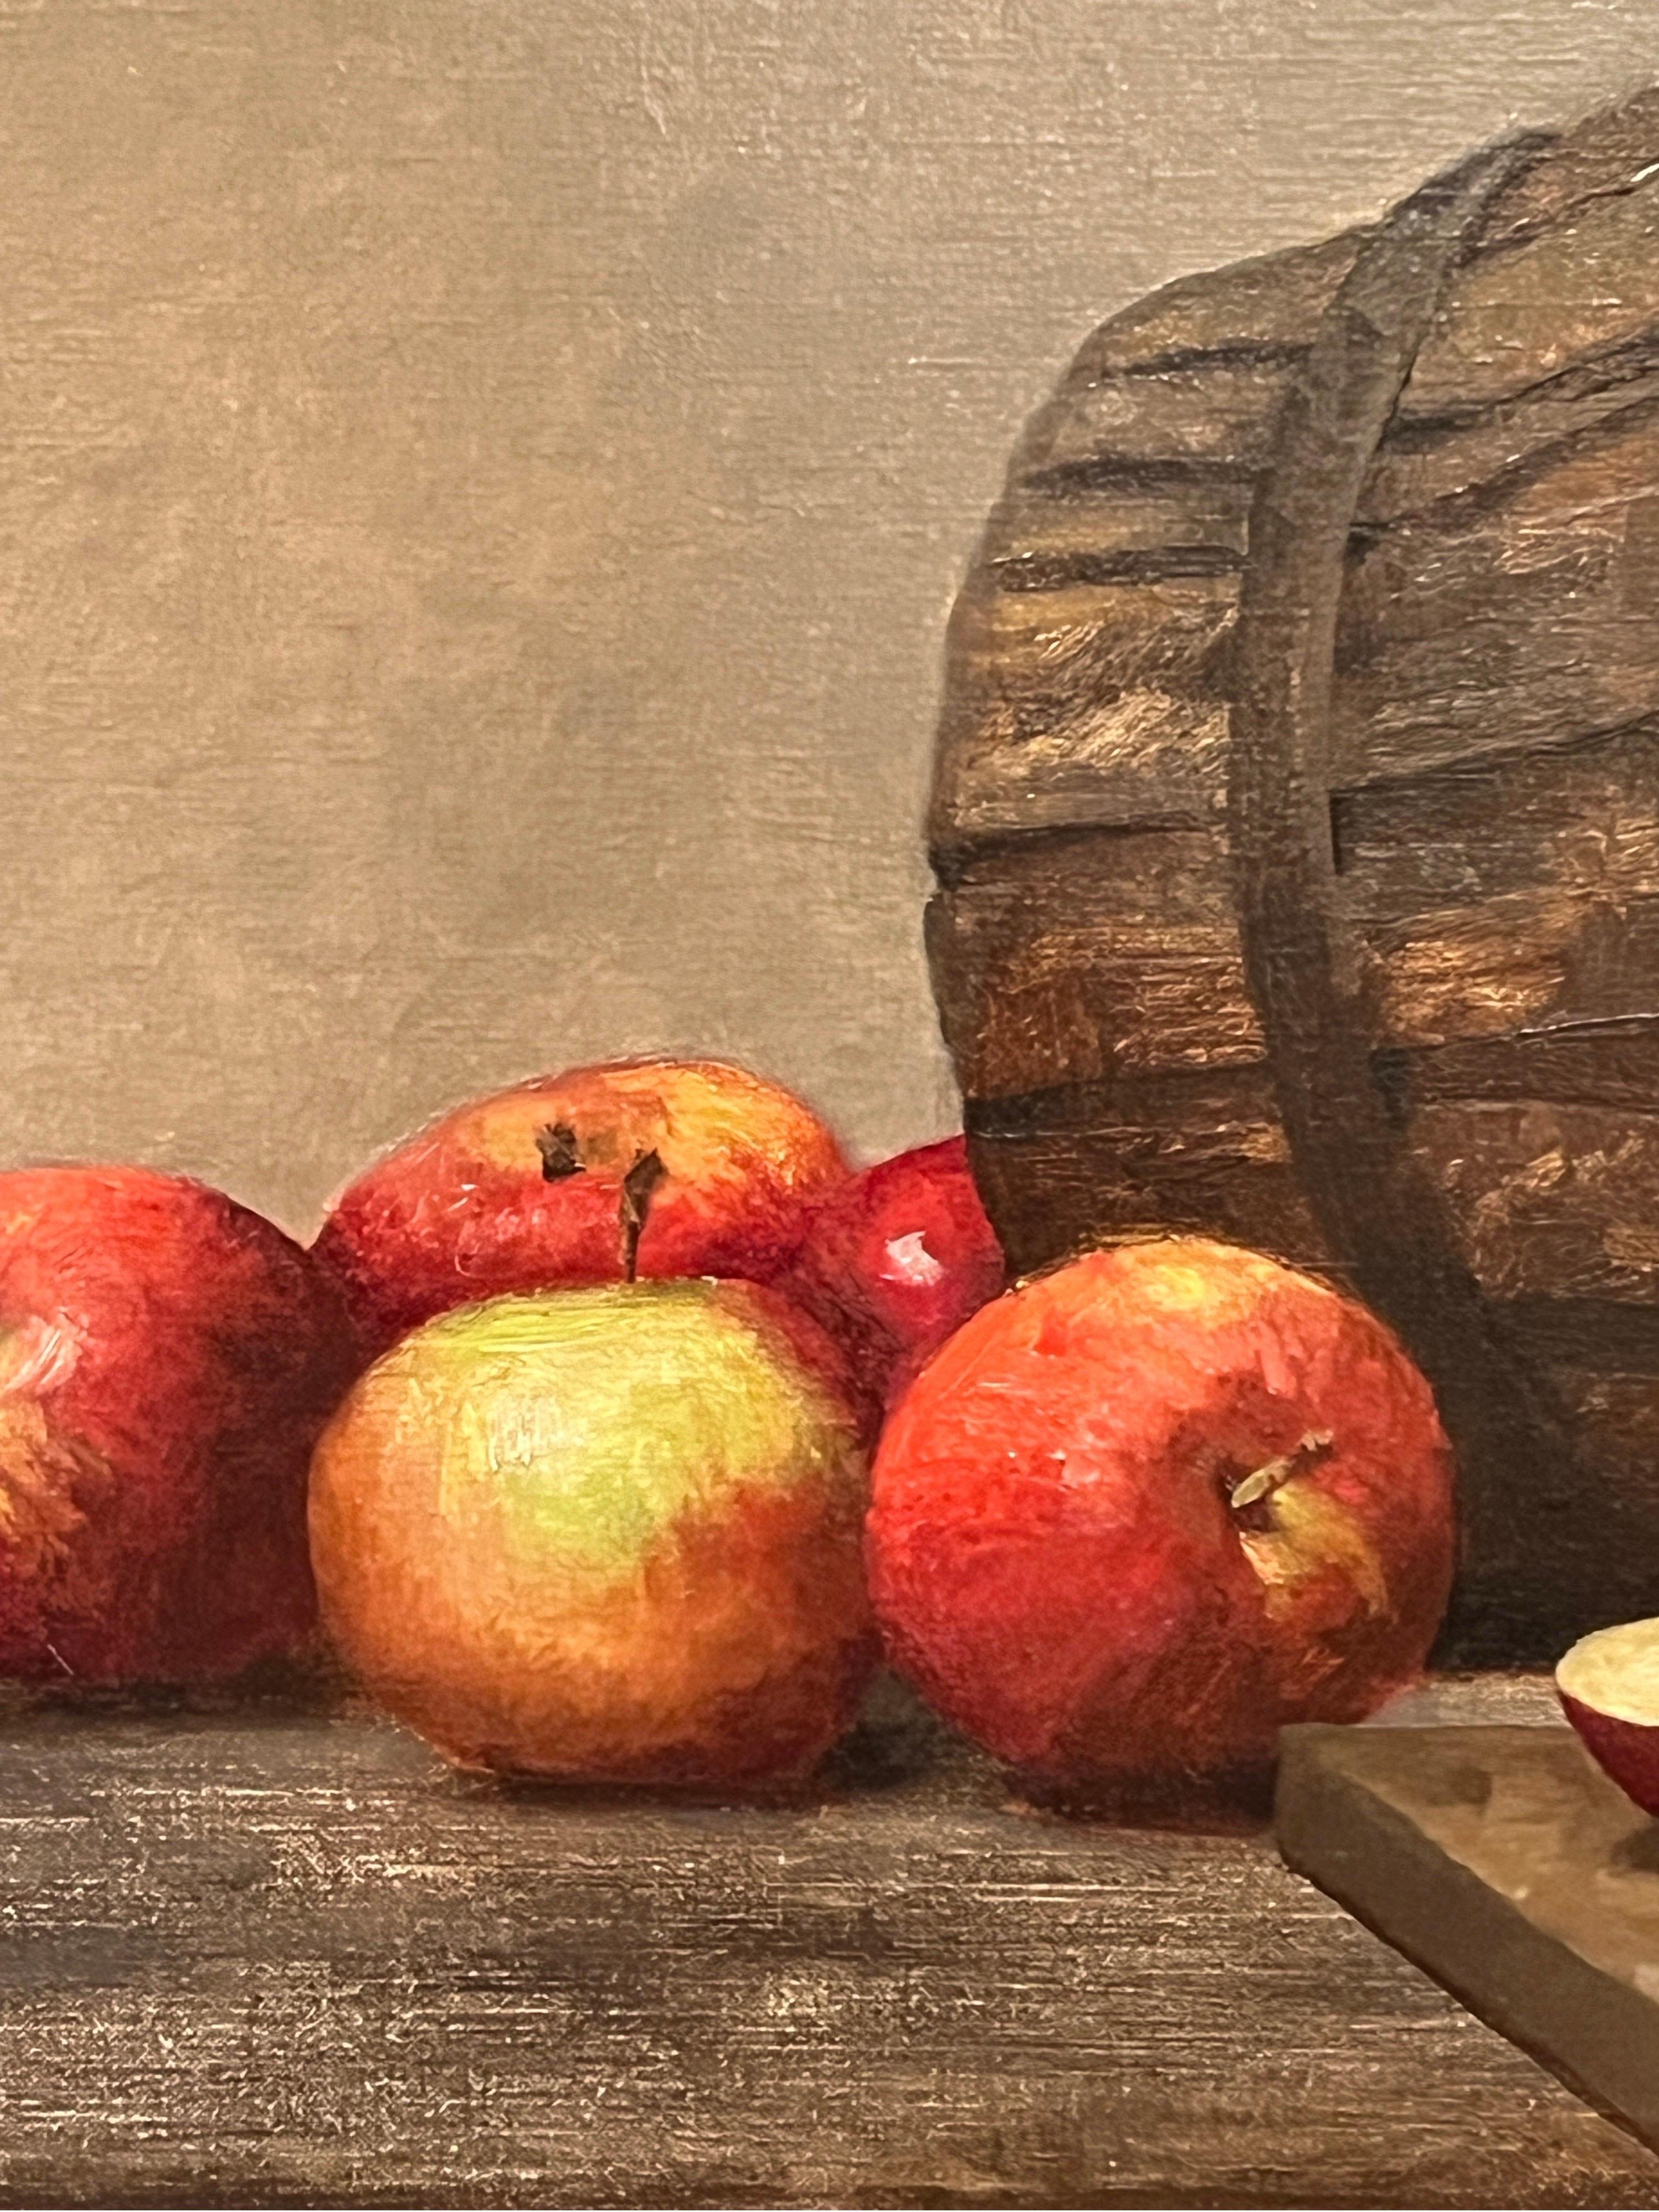 Dale Zinkowski is a master of still life. His work, reminiscent of Golden Age Dutch still life painting, glows with light and subtle, quiet beauty. This original oil painting shows a bunch of beautifully ripe apples, spilling from a rustic basket.